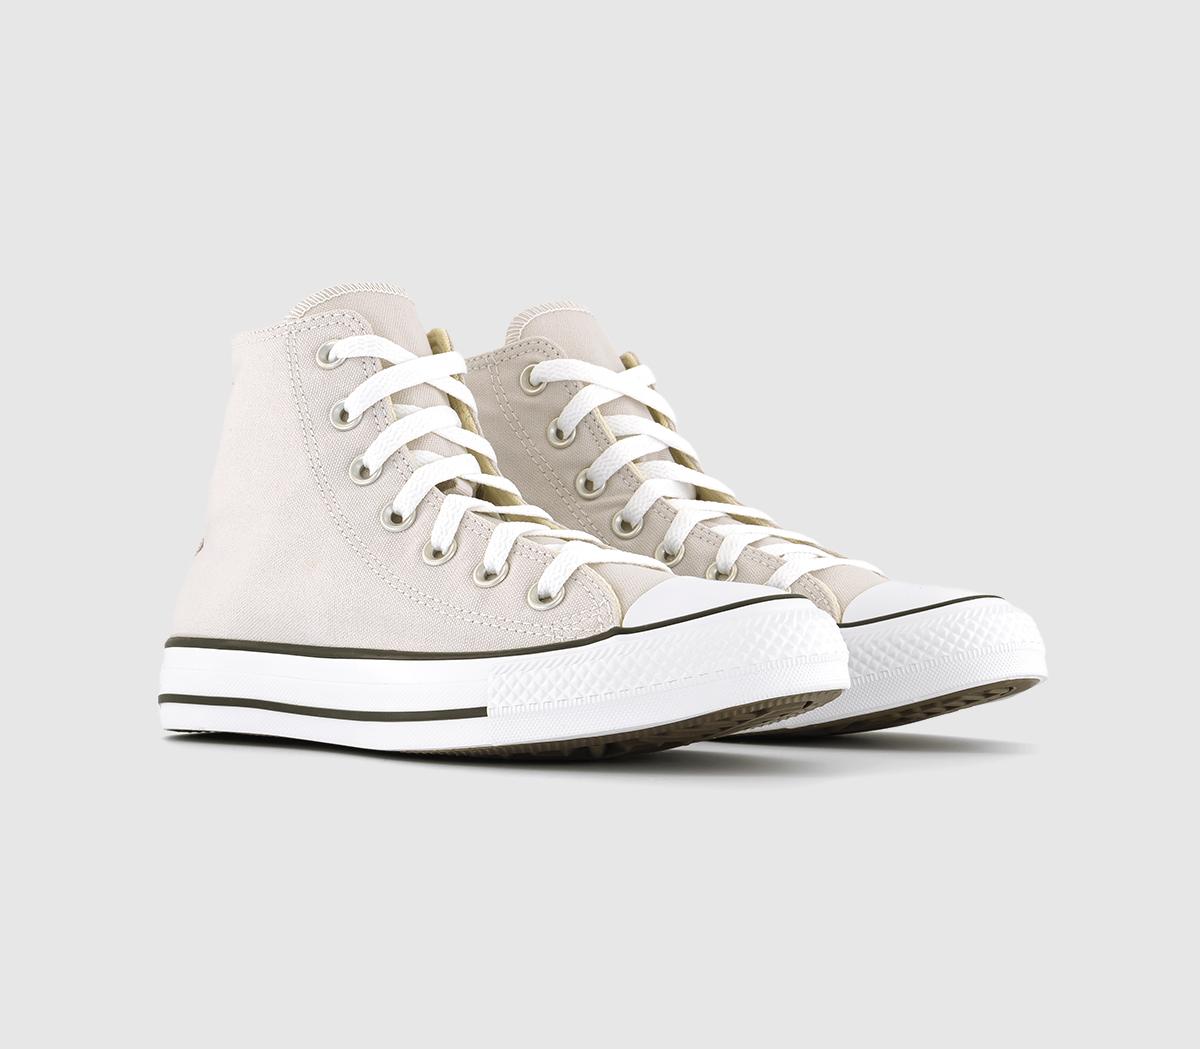 Converse All Star Hi Trainers Pale Putty White Black Natural, 7